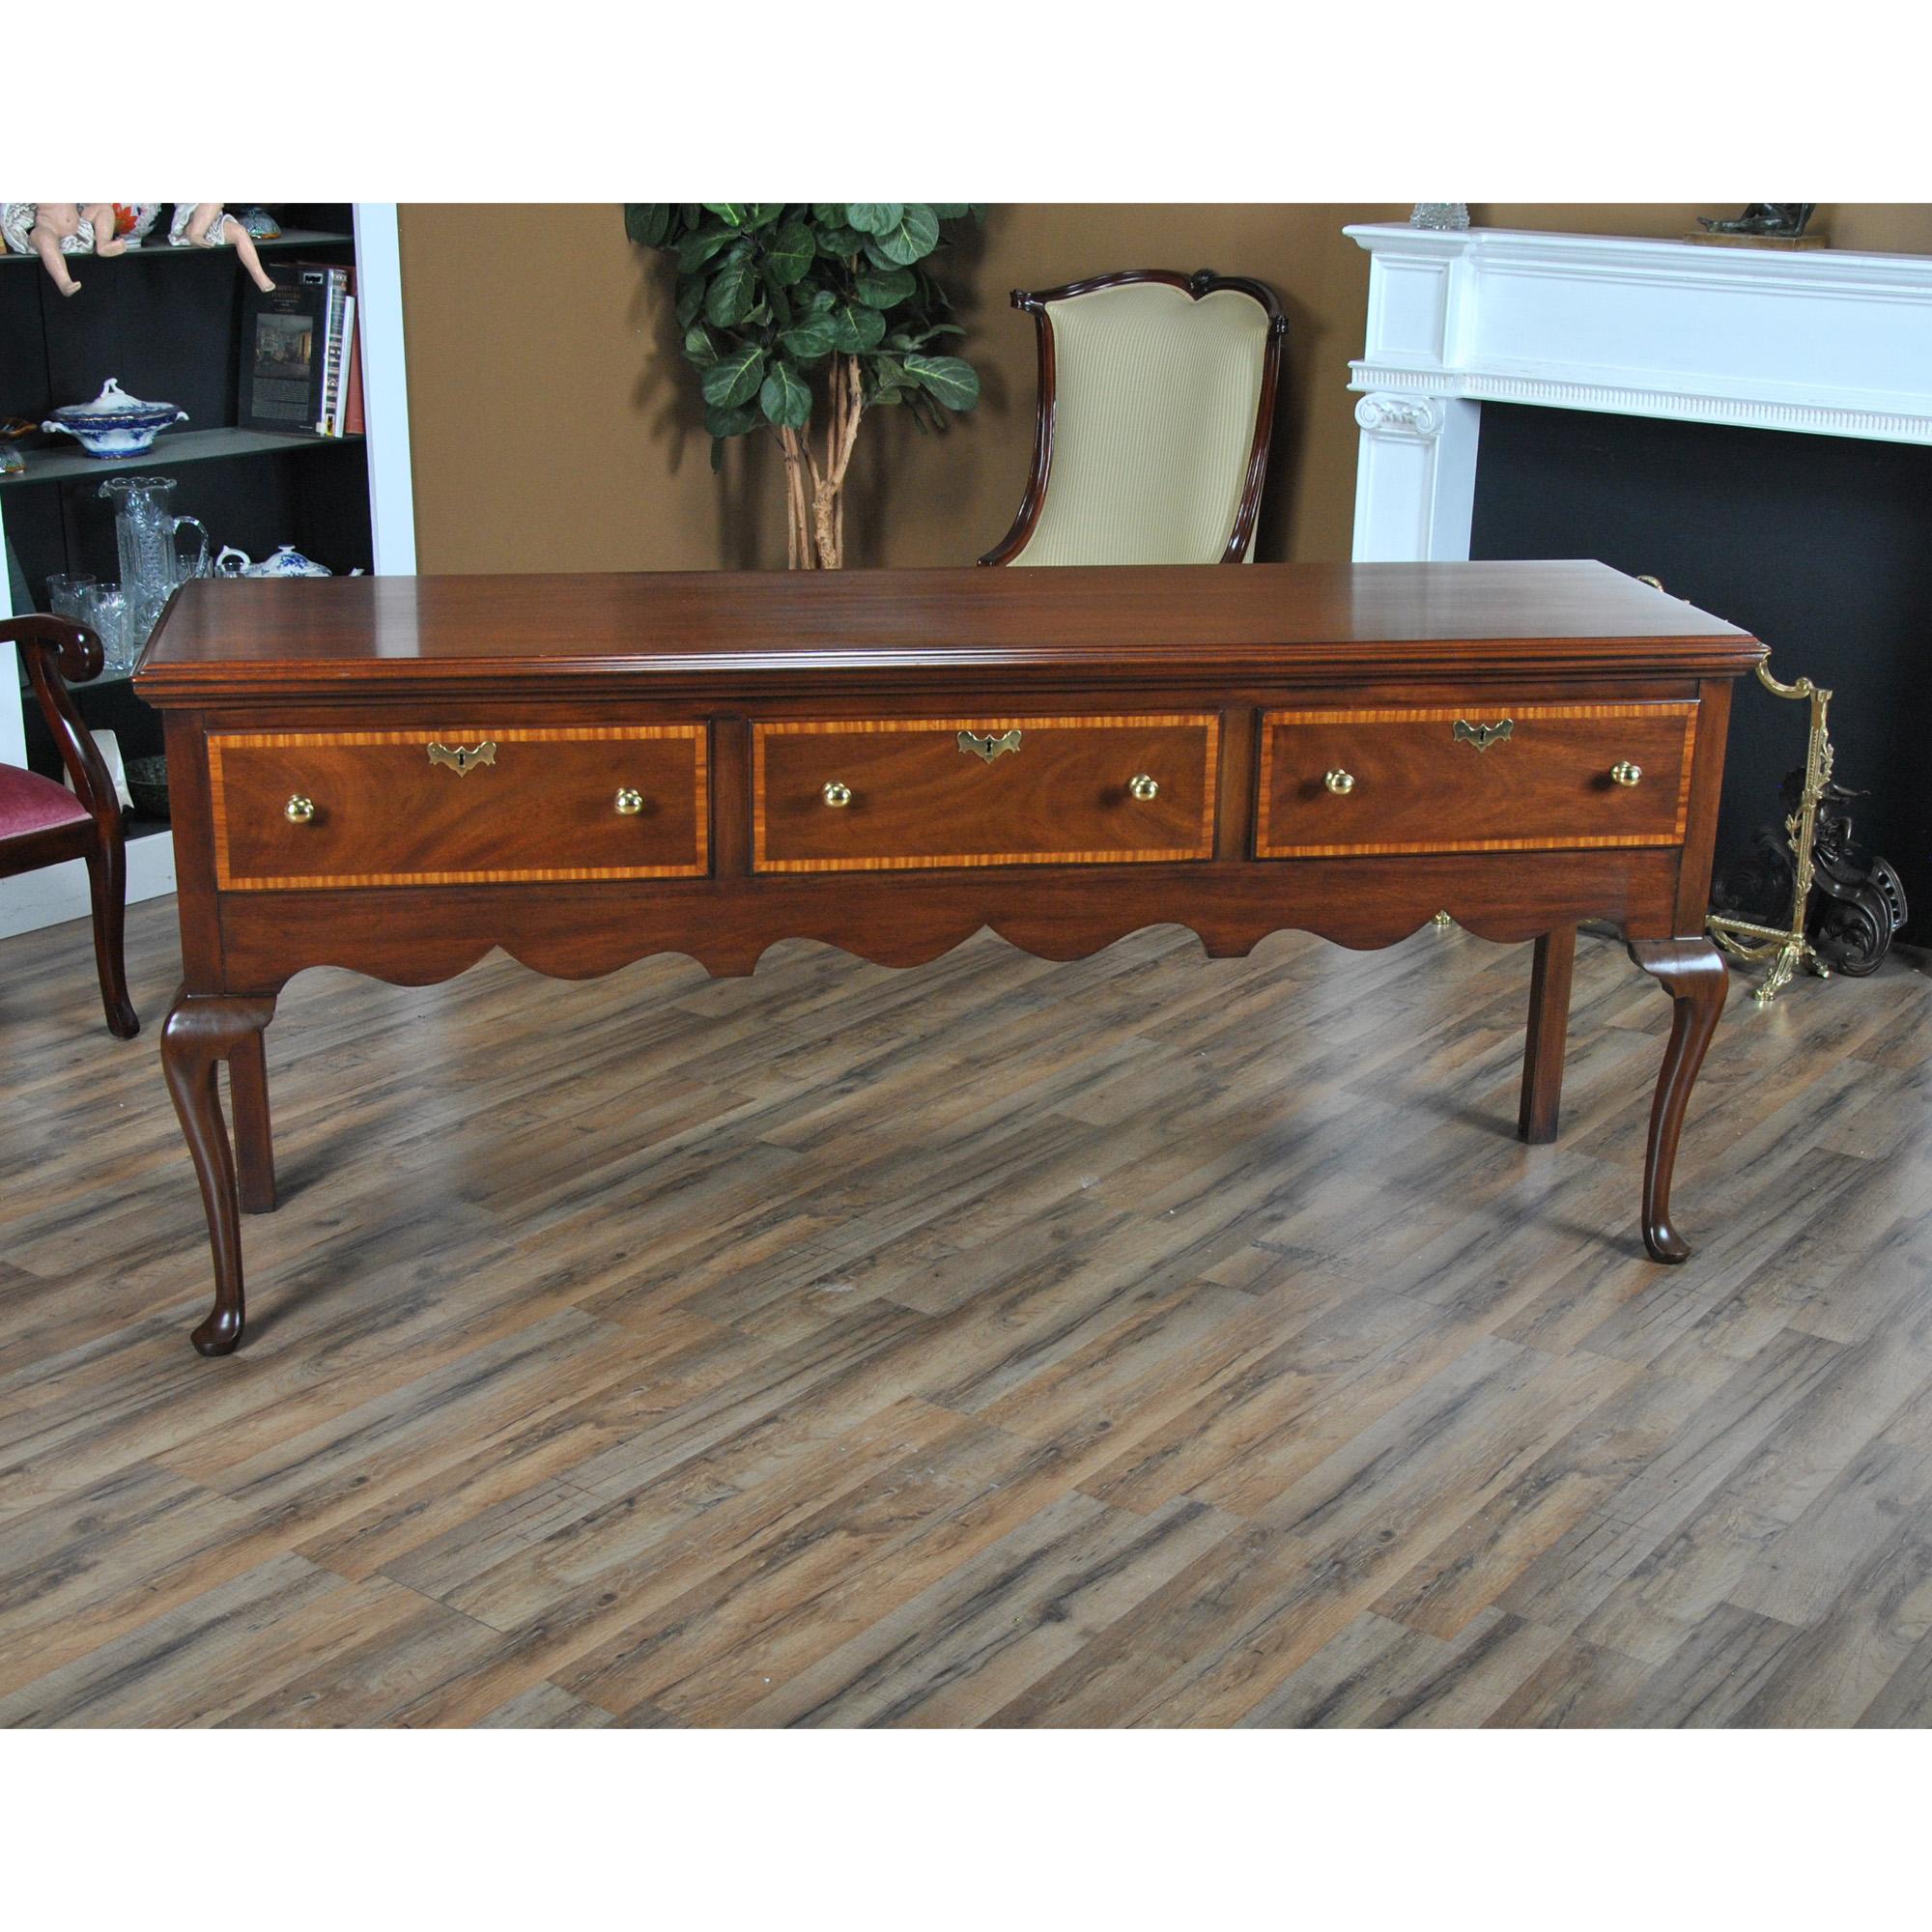 A vintage Henkel Harris Vintage Banded Sideboard in excellent condition, including a recently hand rubbed top, giving the sideboard a beautiful appearance.

Simple yet sophisticated this beautiful Henkel Harris Sideboard has everything going for